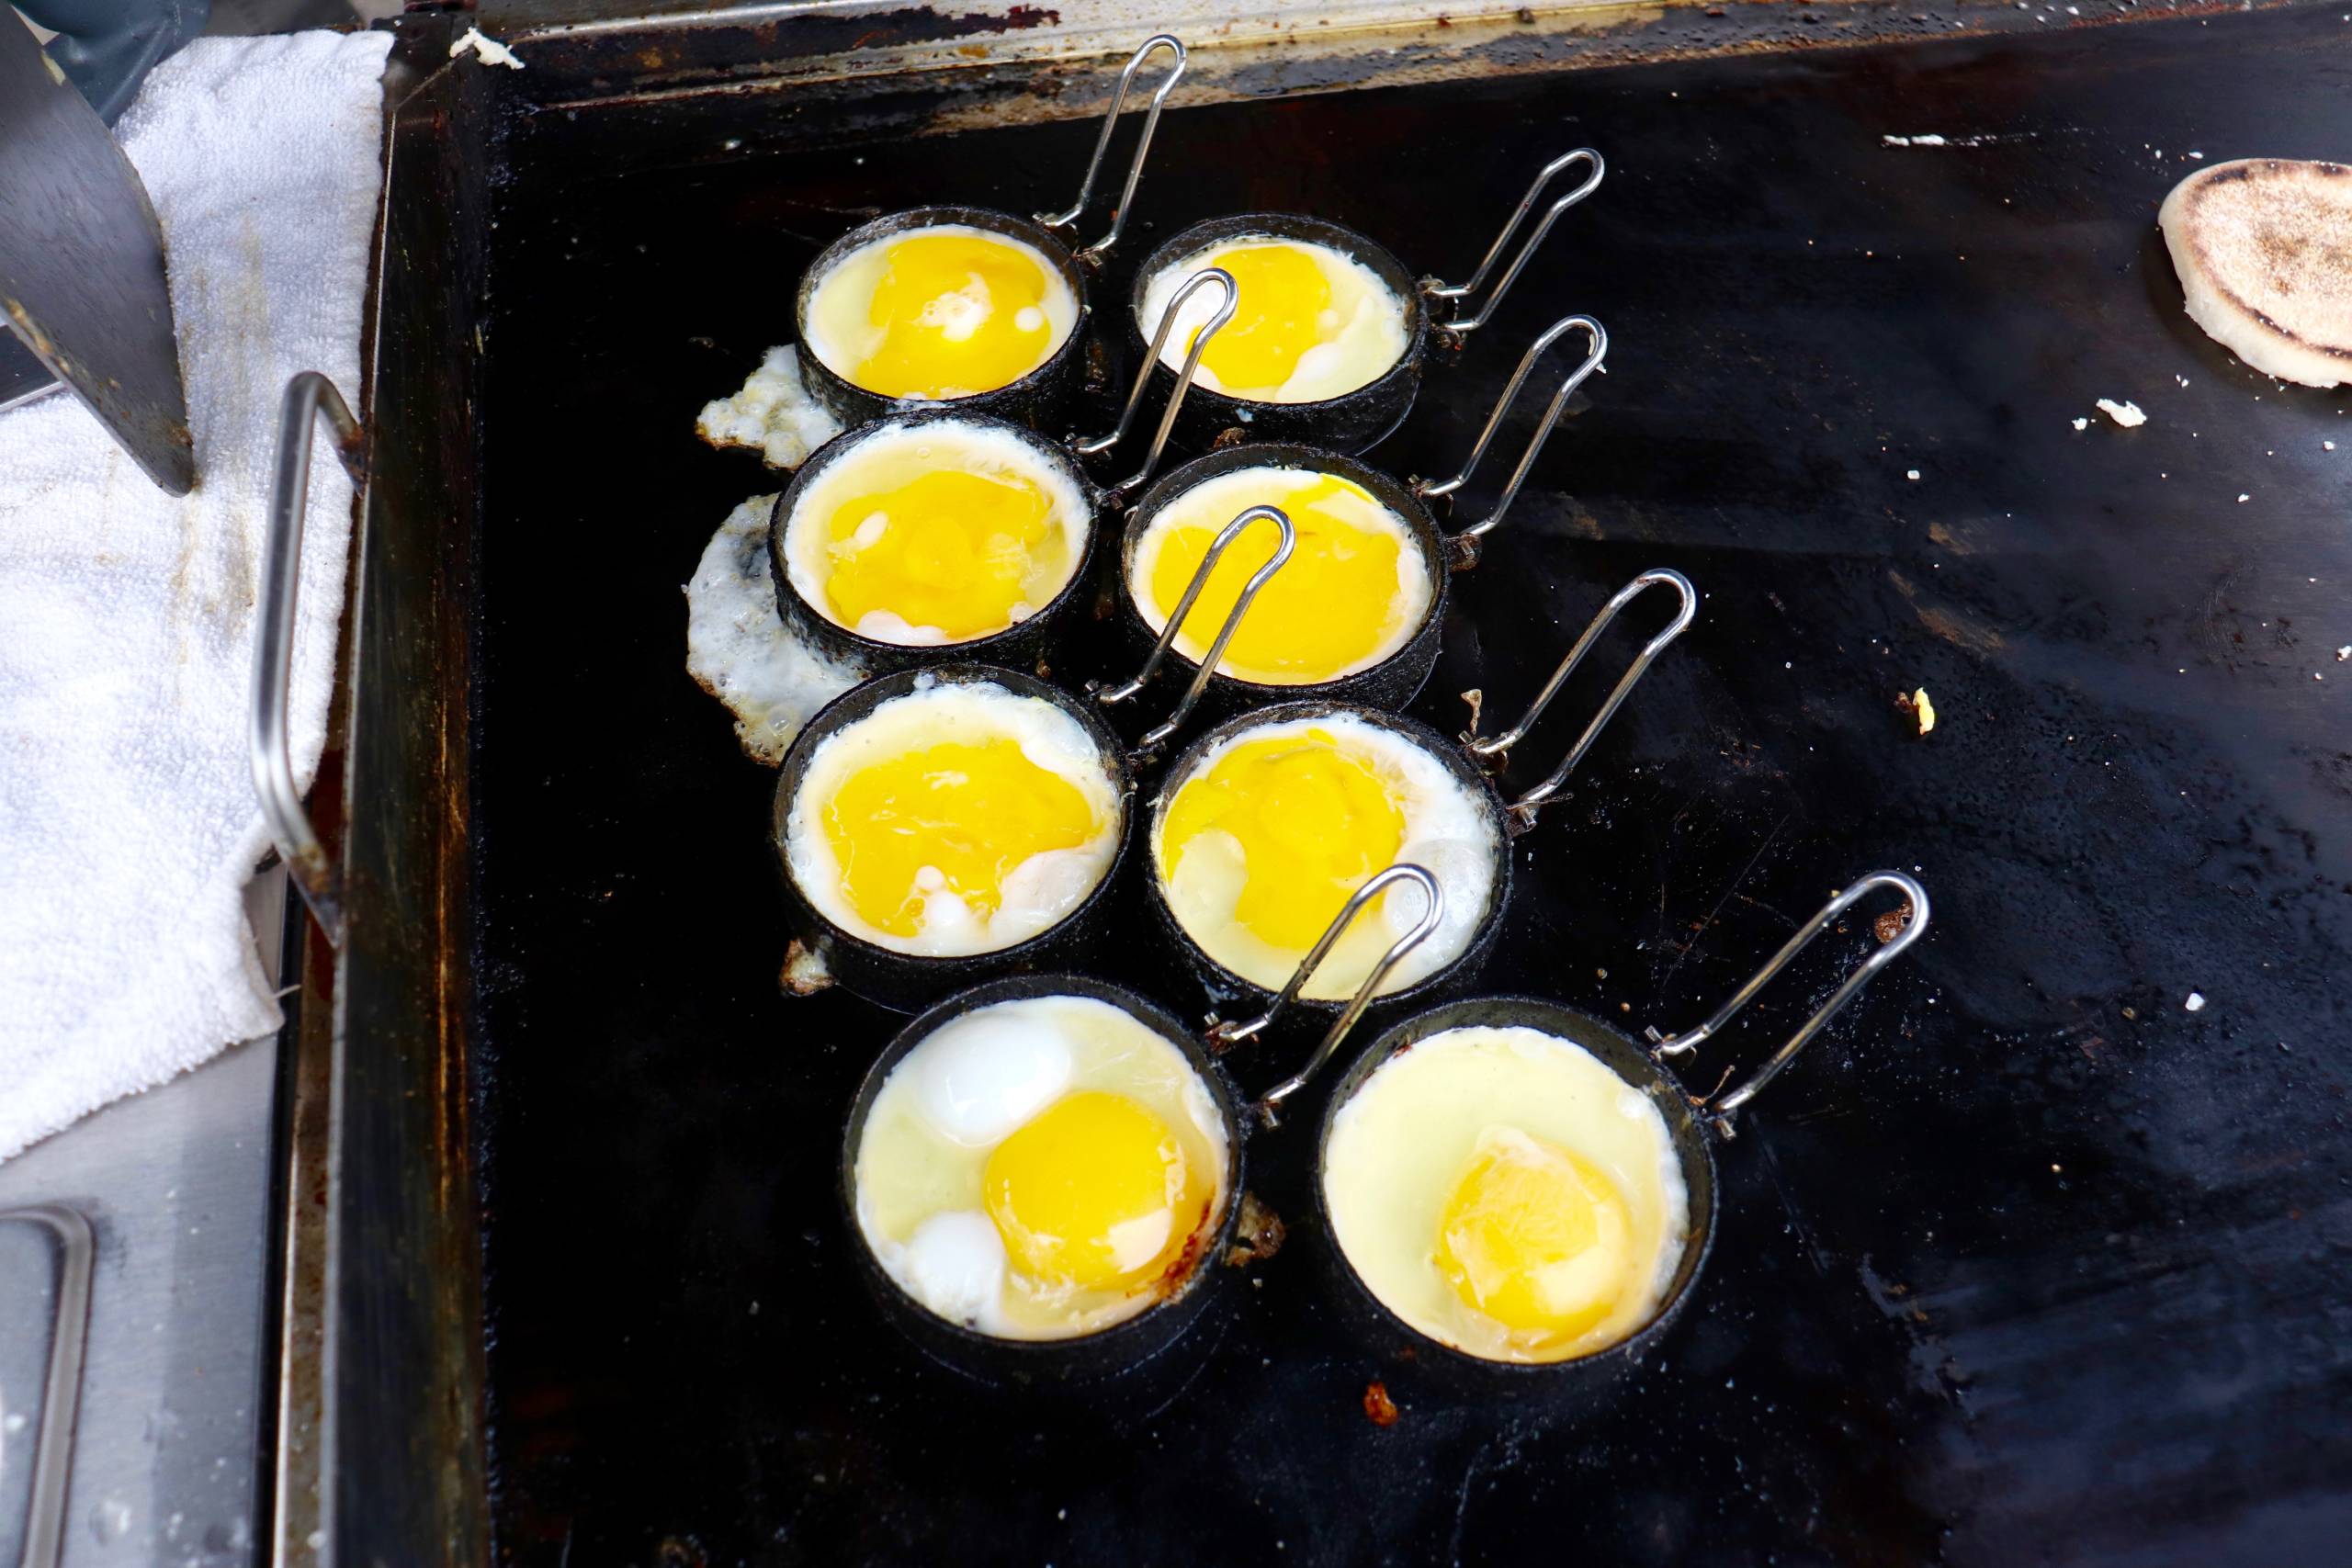 an order of eight eggs are prepared on a portable outdoor griddle